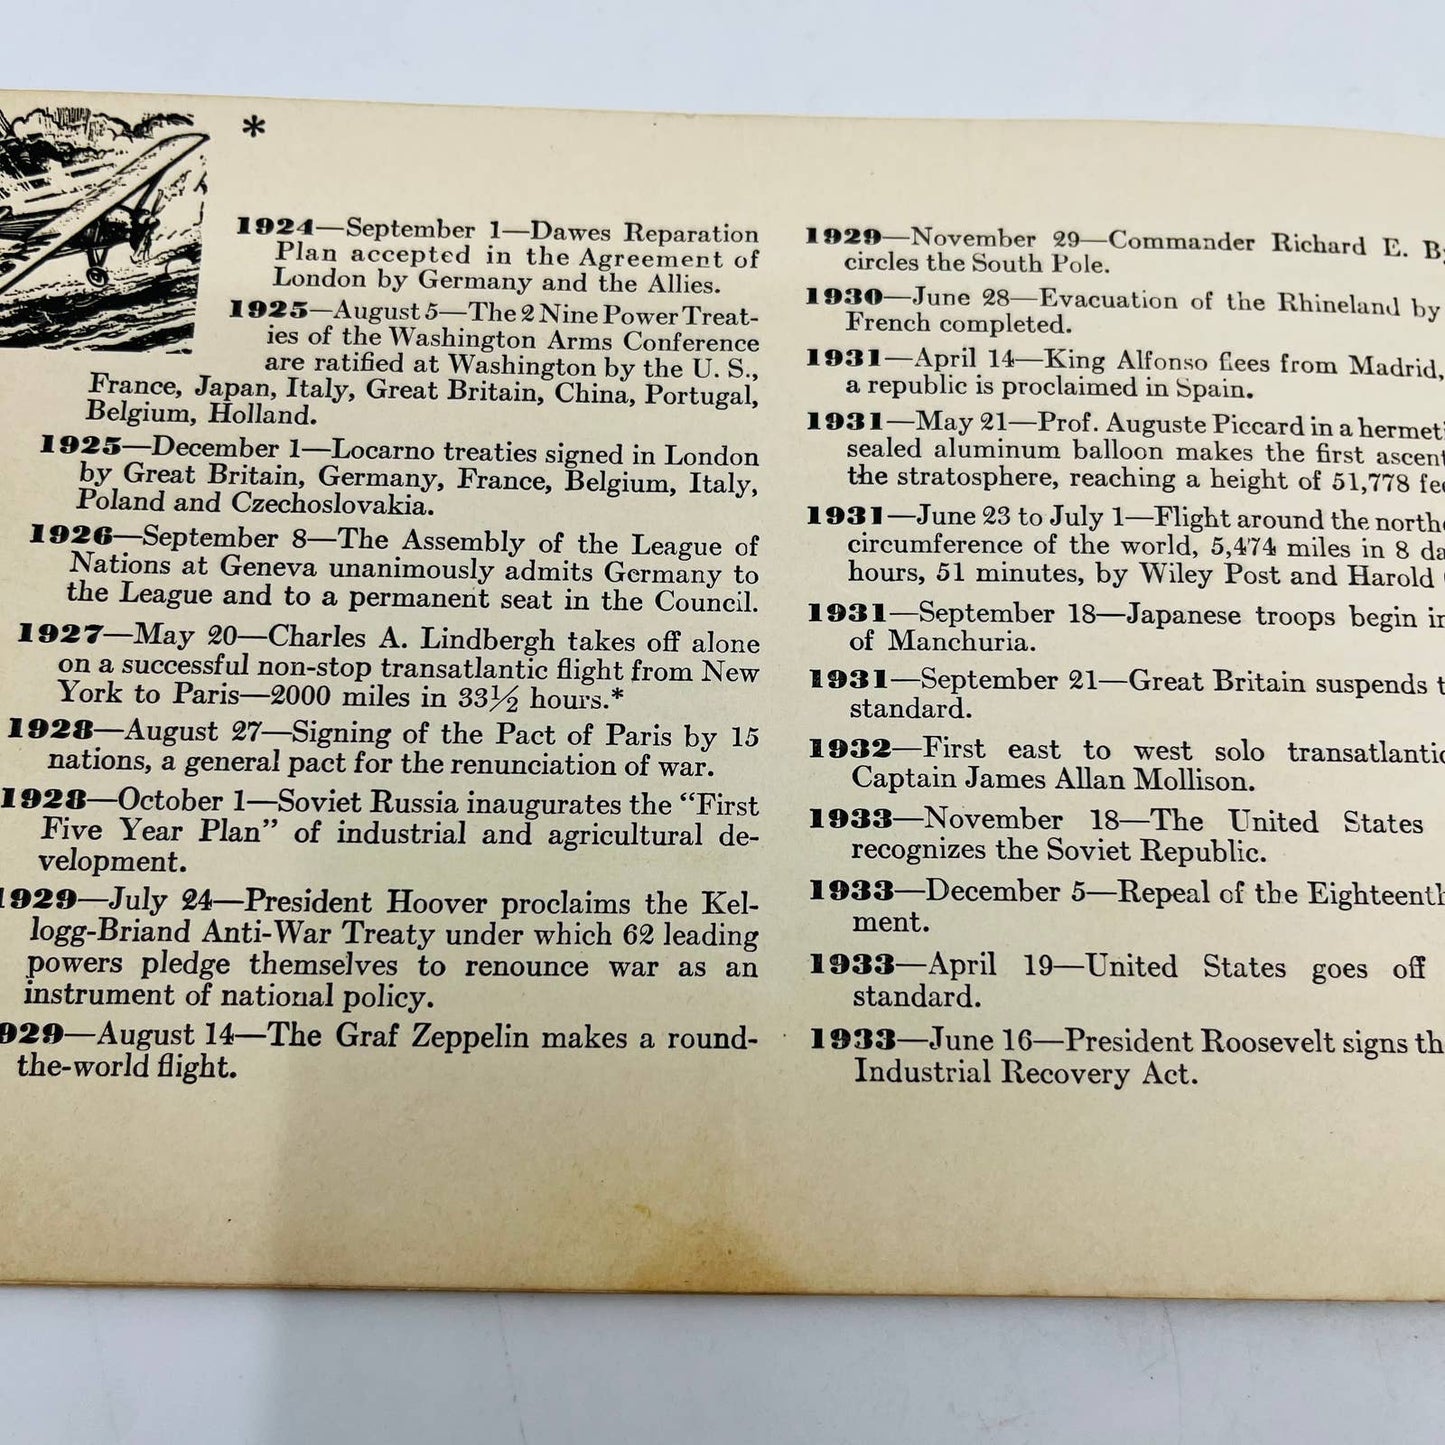 1933 Chase and Sanborn Coffee Promotional Book 400 Famous Dates in History EA1